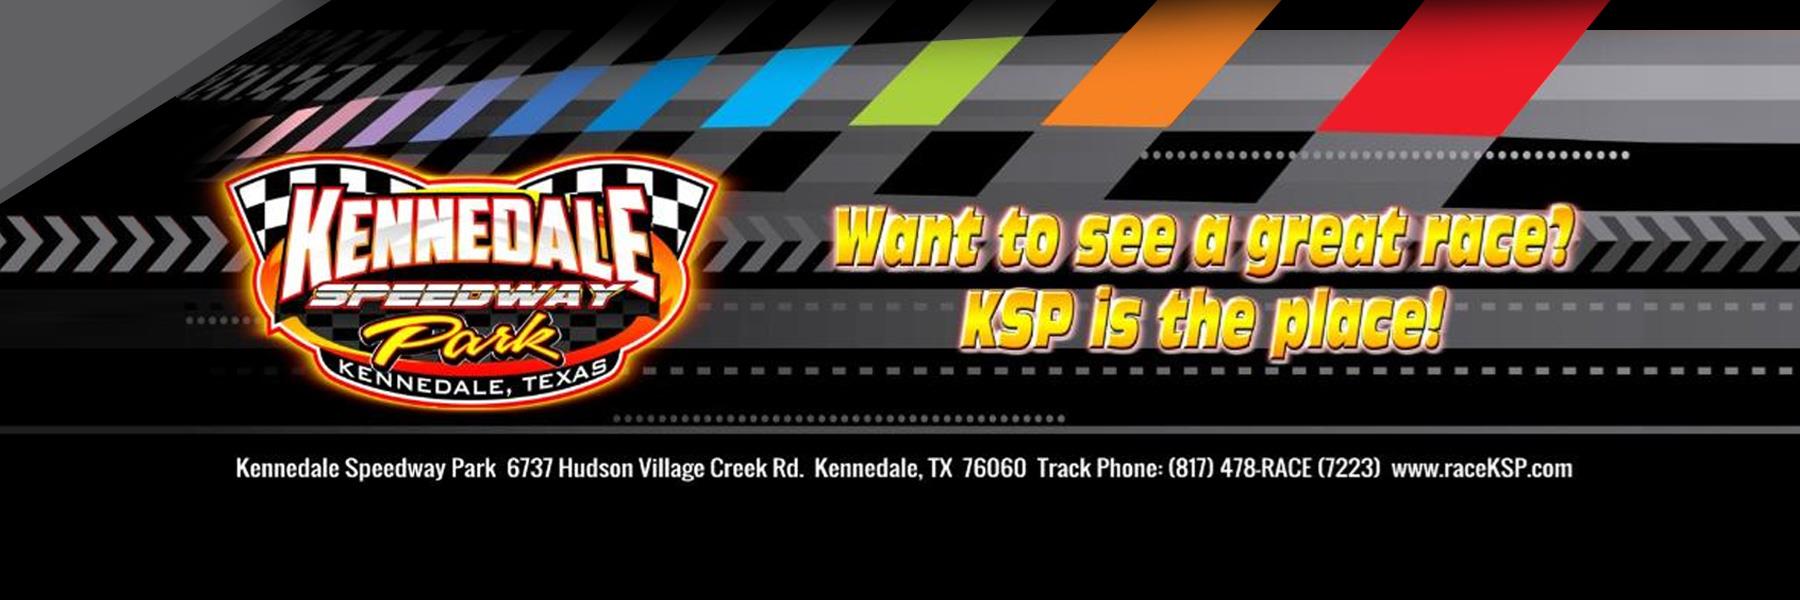 3/20/2021 - Kennedale Speedway Park